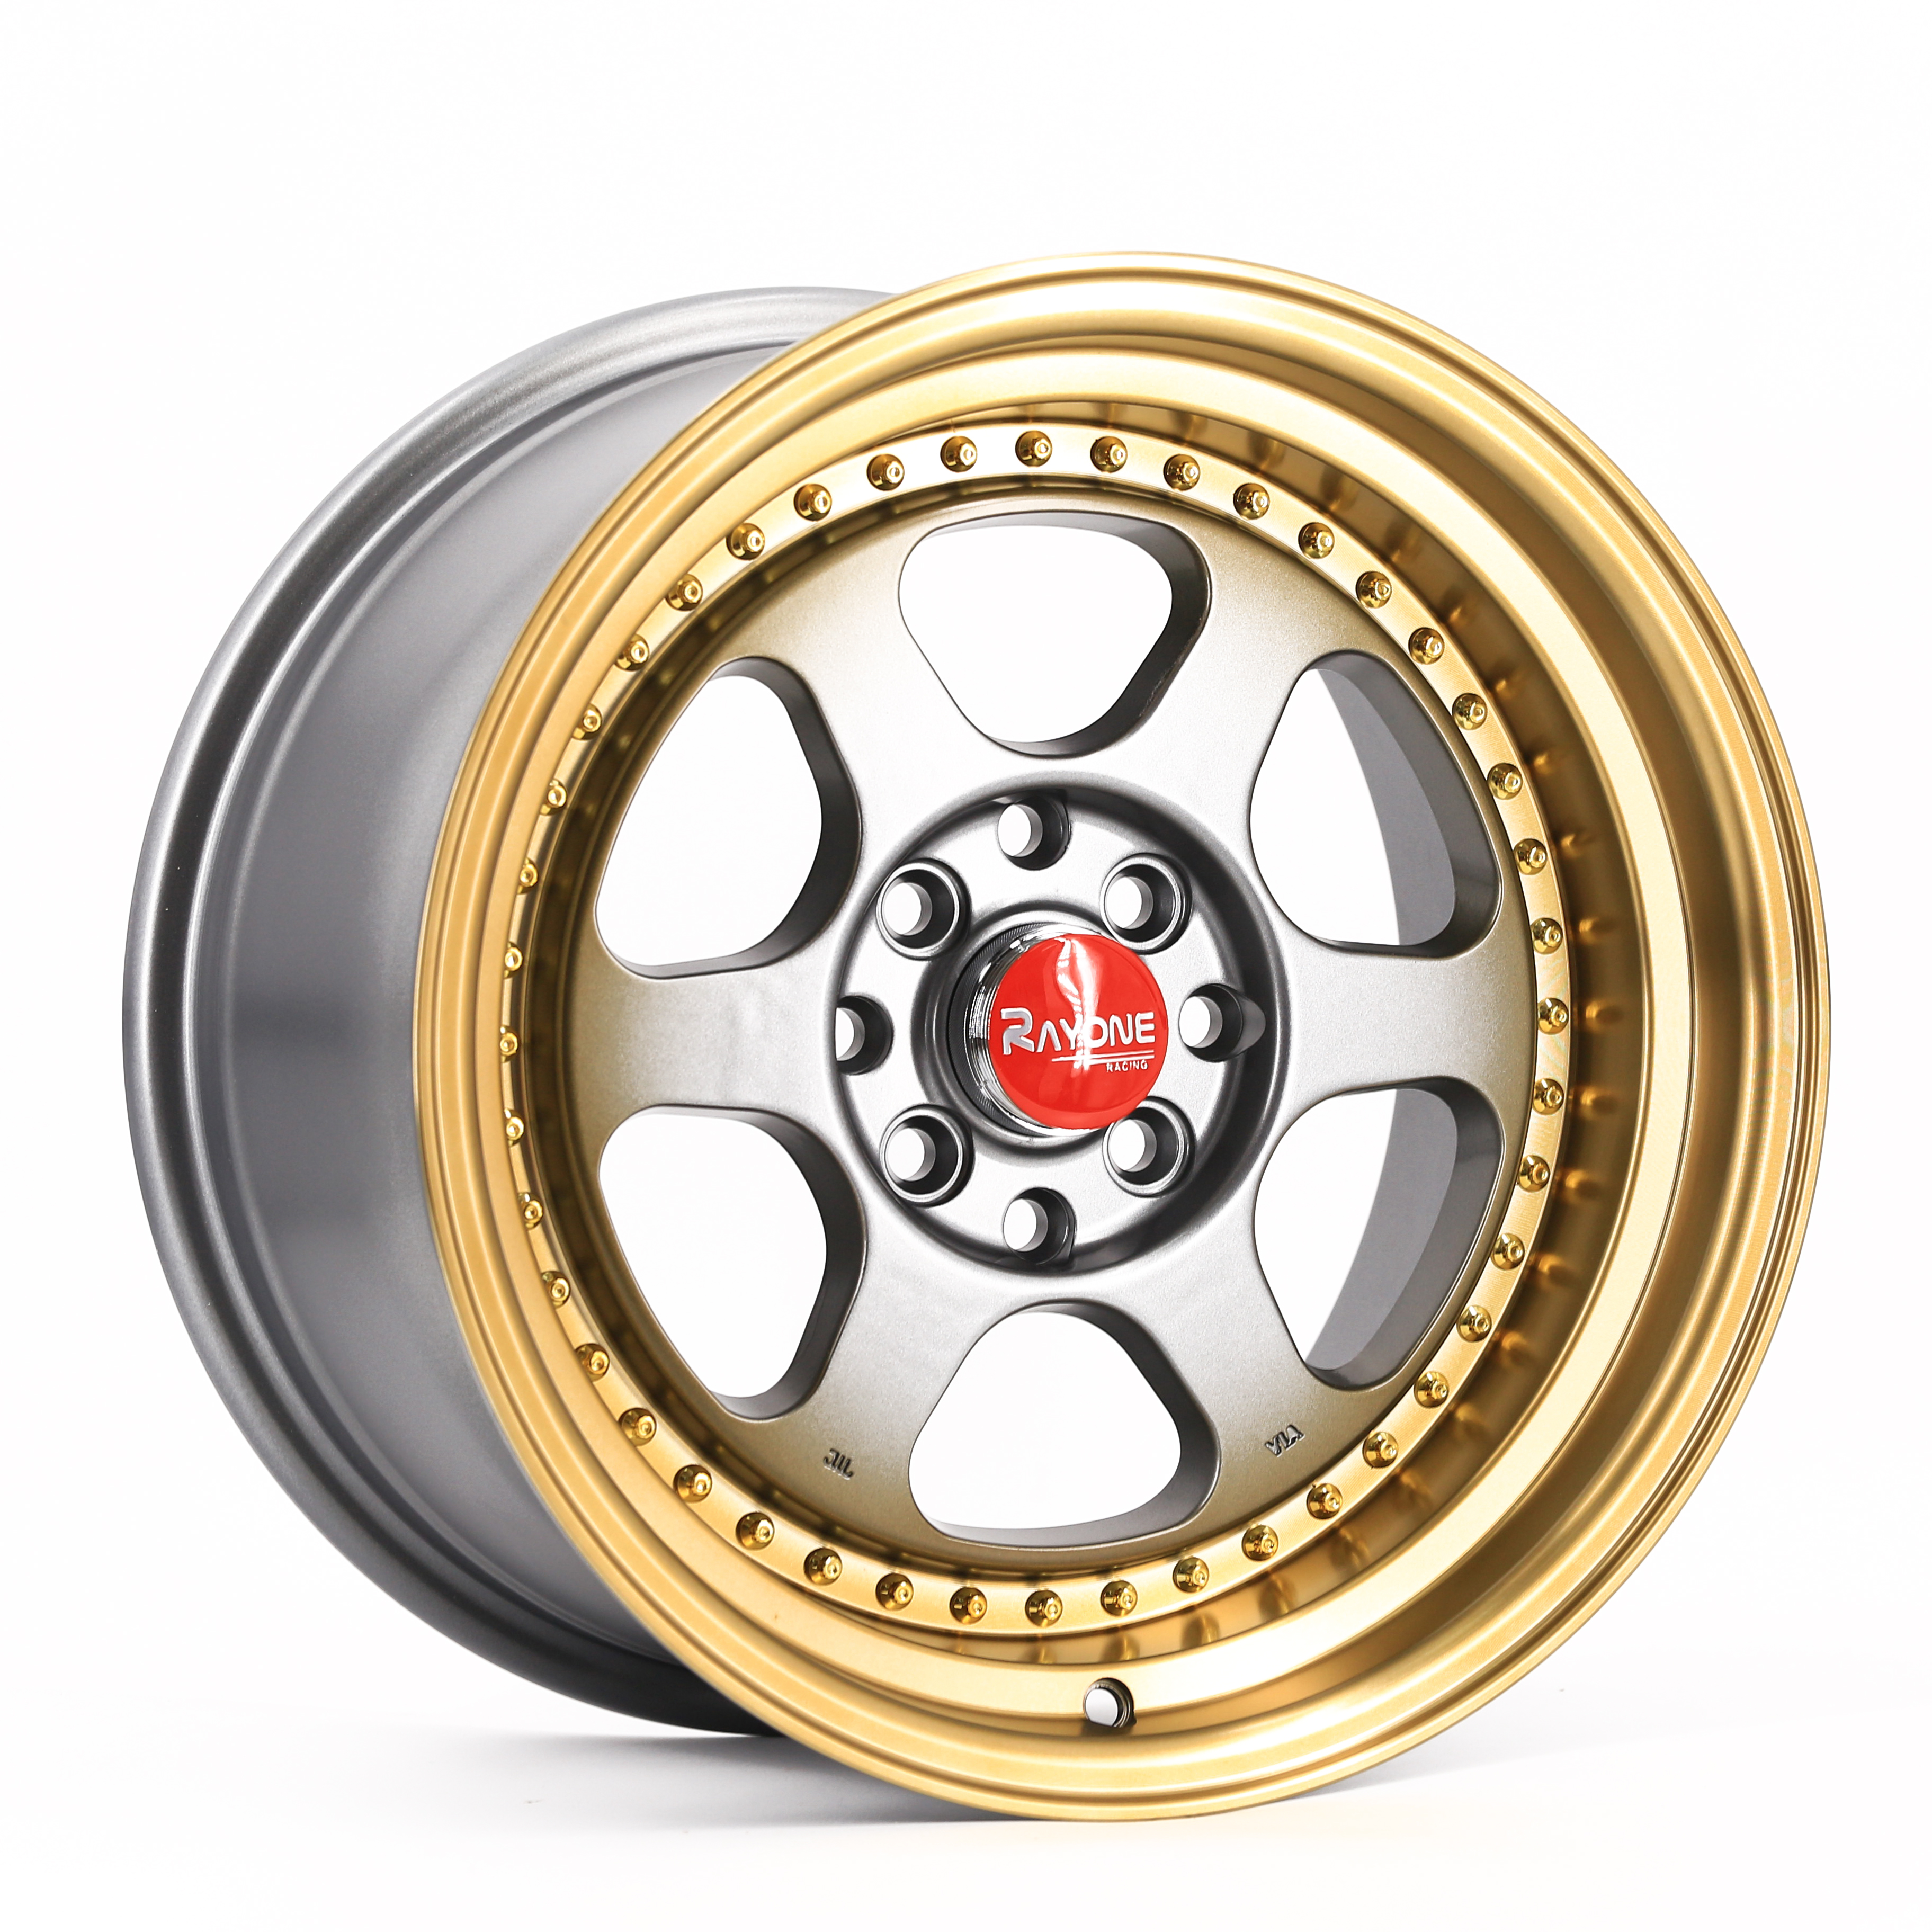 Hot New Products 18 Inch Alloy Rims - Gold Color Deep Dish Rivets 4 Hole Rims 15 Inch Alloy Wheels For Racing Car – Rayone